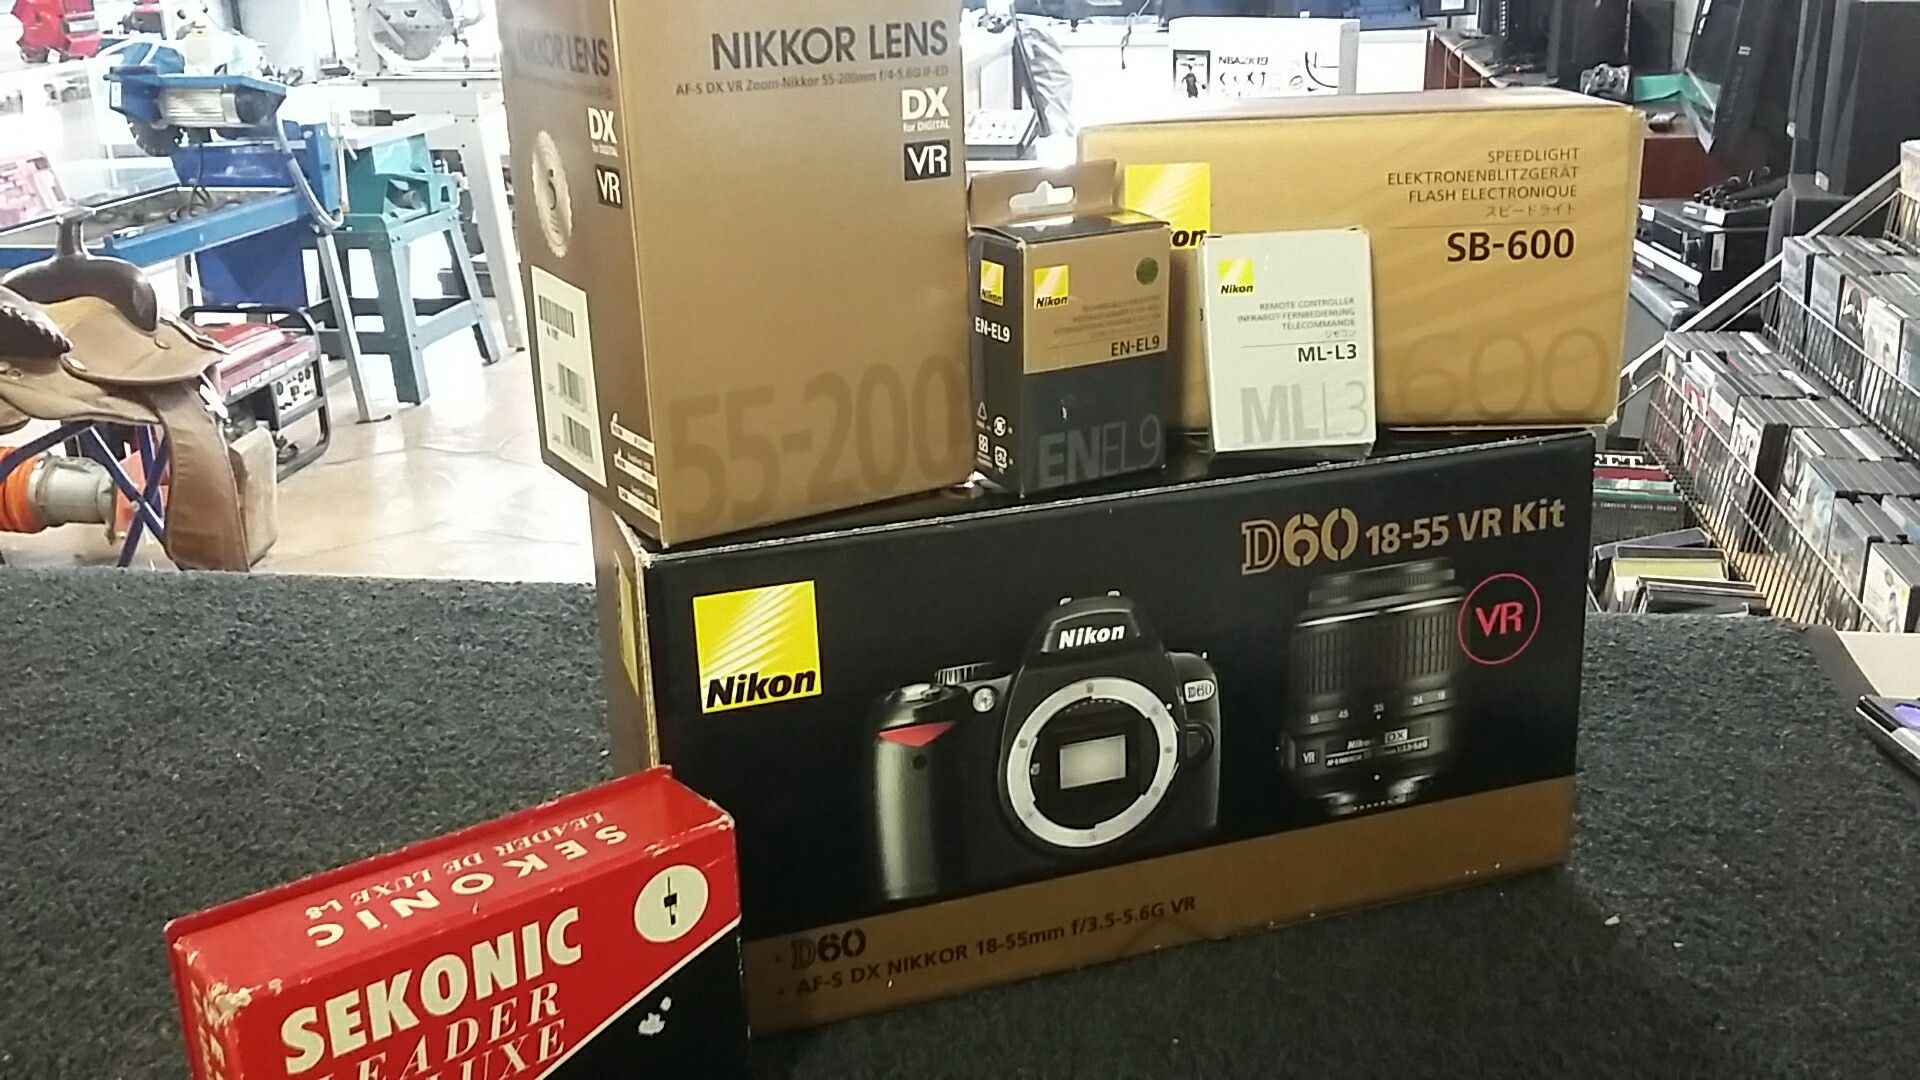 Nikon D60 18-55 VR kit and much more!